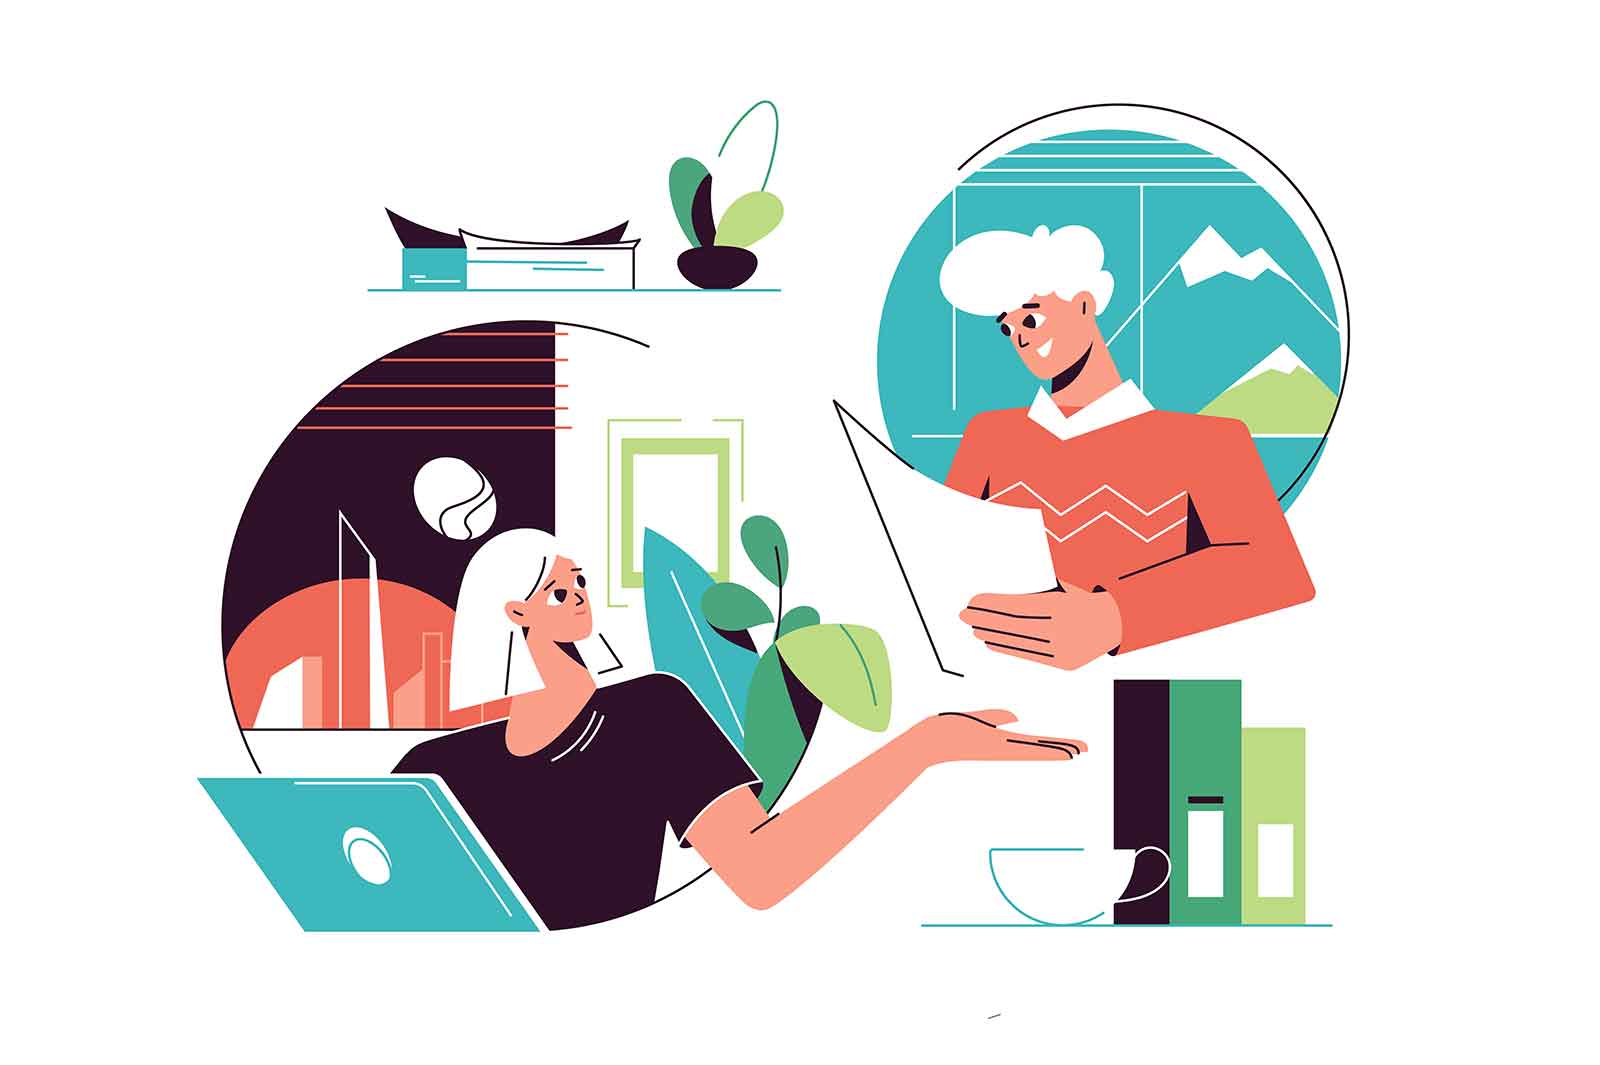 Coworkers communicate on distance, remote work concept vector illustration.